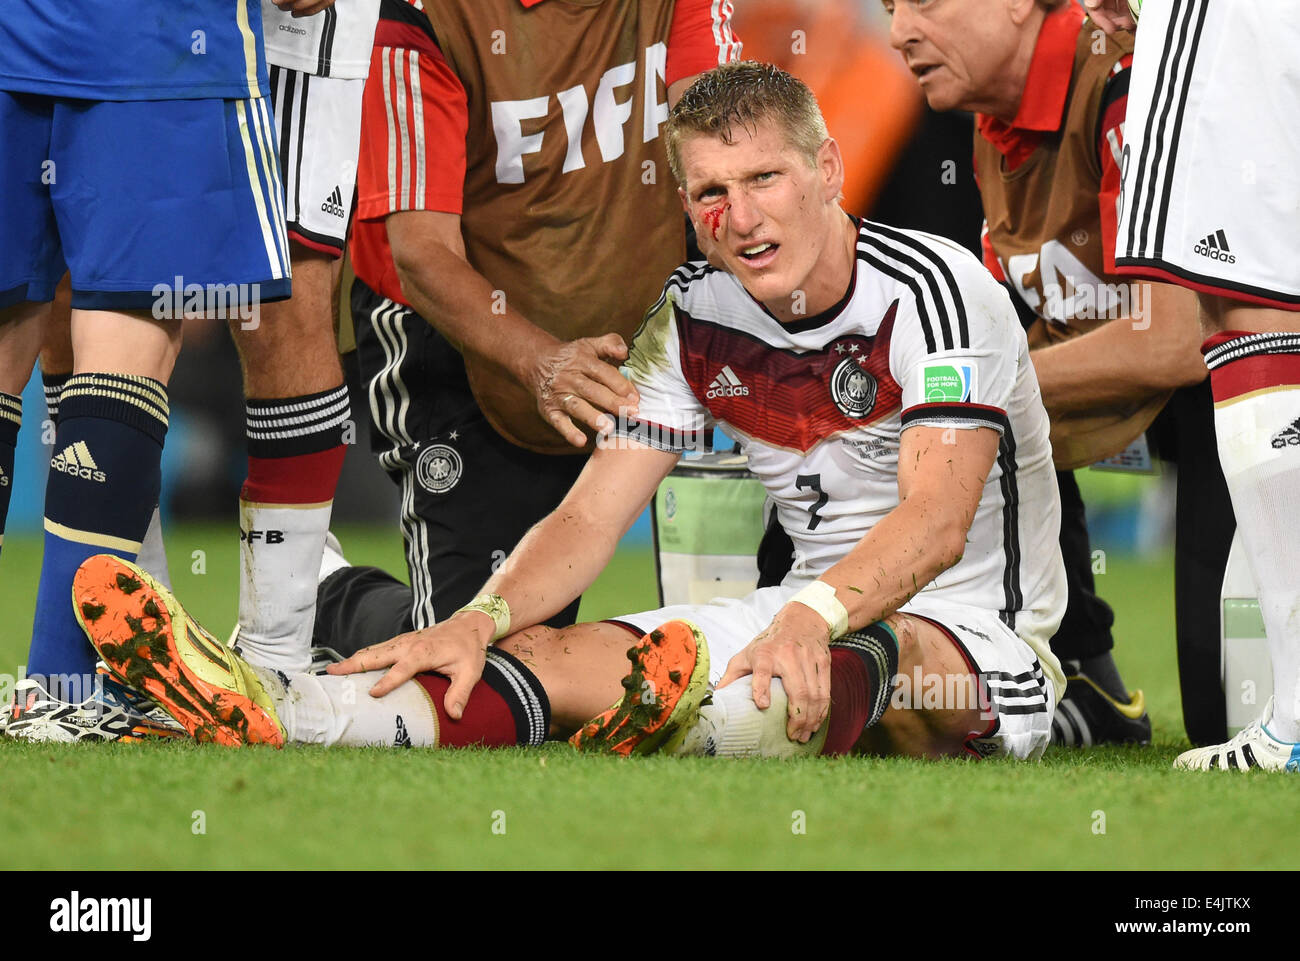 Rio de Janeiro, Brazil. 13th July, 2014. Injured Bastian Schweinsteiger of Germany sits on the ground after being fould by an Argentinian player during the FIFA World Cup 2014 final soccer match between Germany and Argentina at the Estadio do Maracana in Rio de Janeiro, Brazil, 13 July 2014. Photo: Marcus Brandt/dpa/Alamy Live News Stock Photo